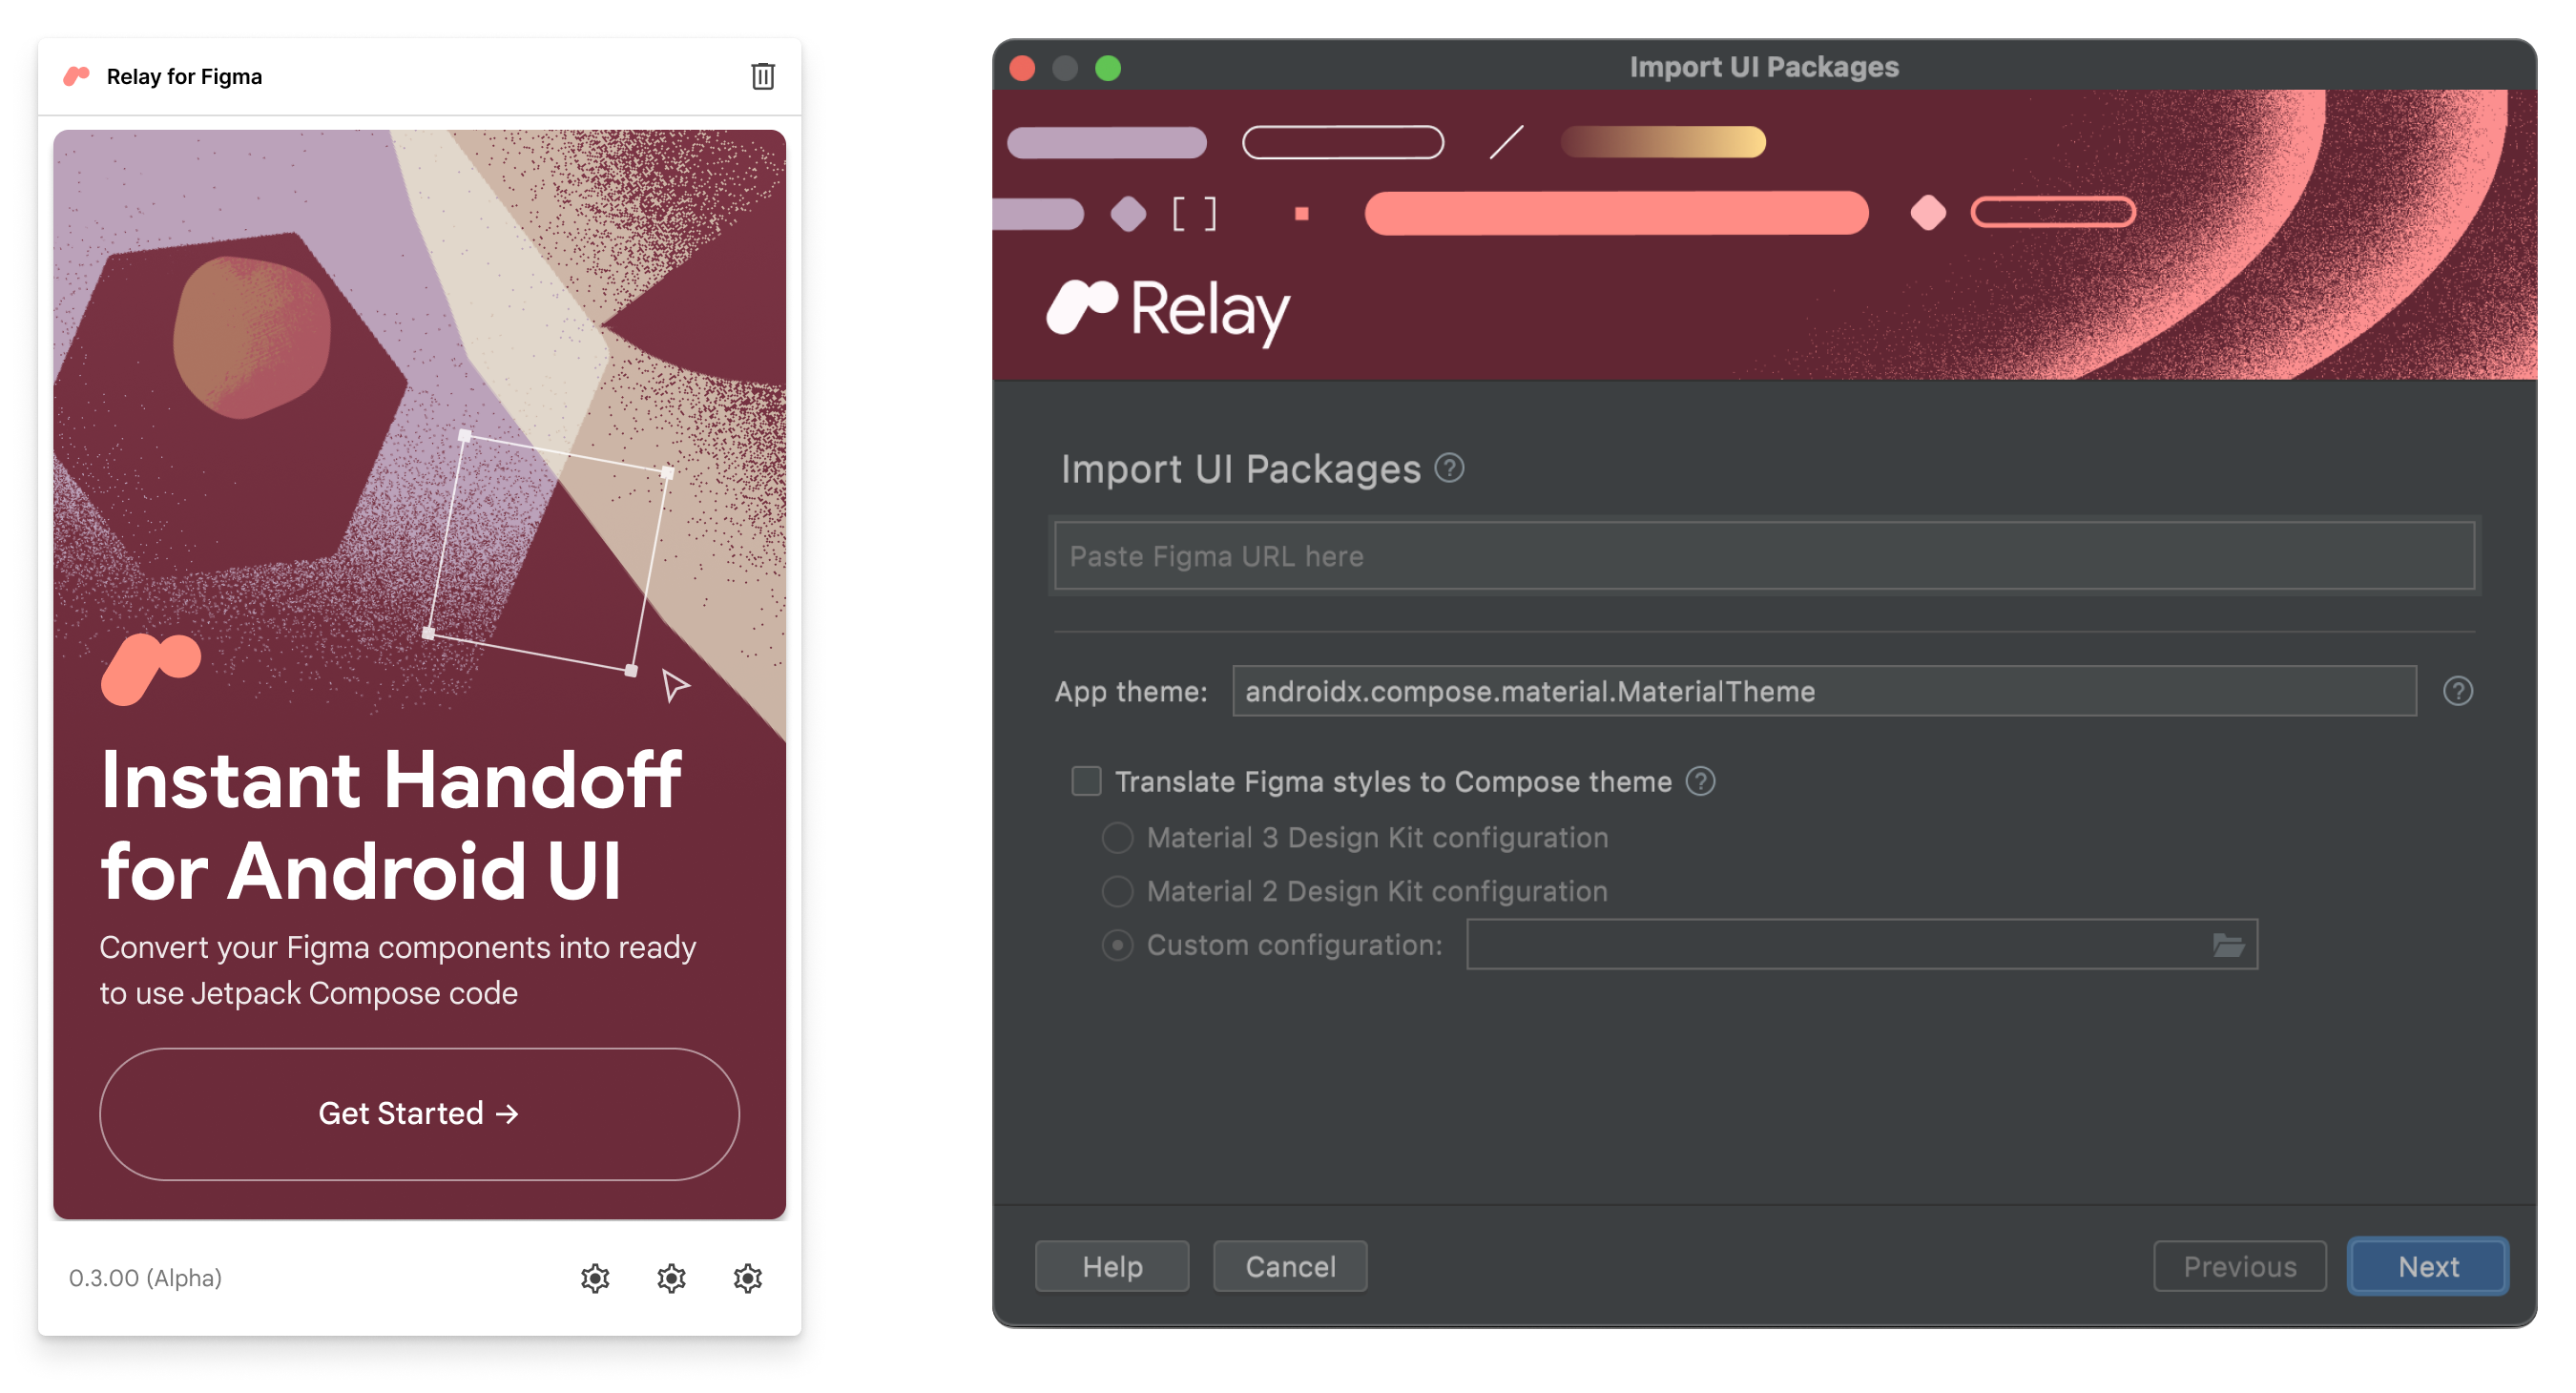 Relay for Figma 和 Relay for Android Studio